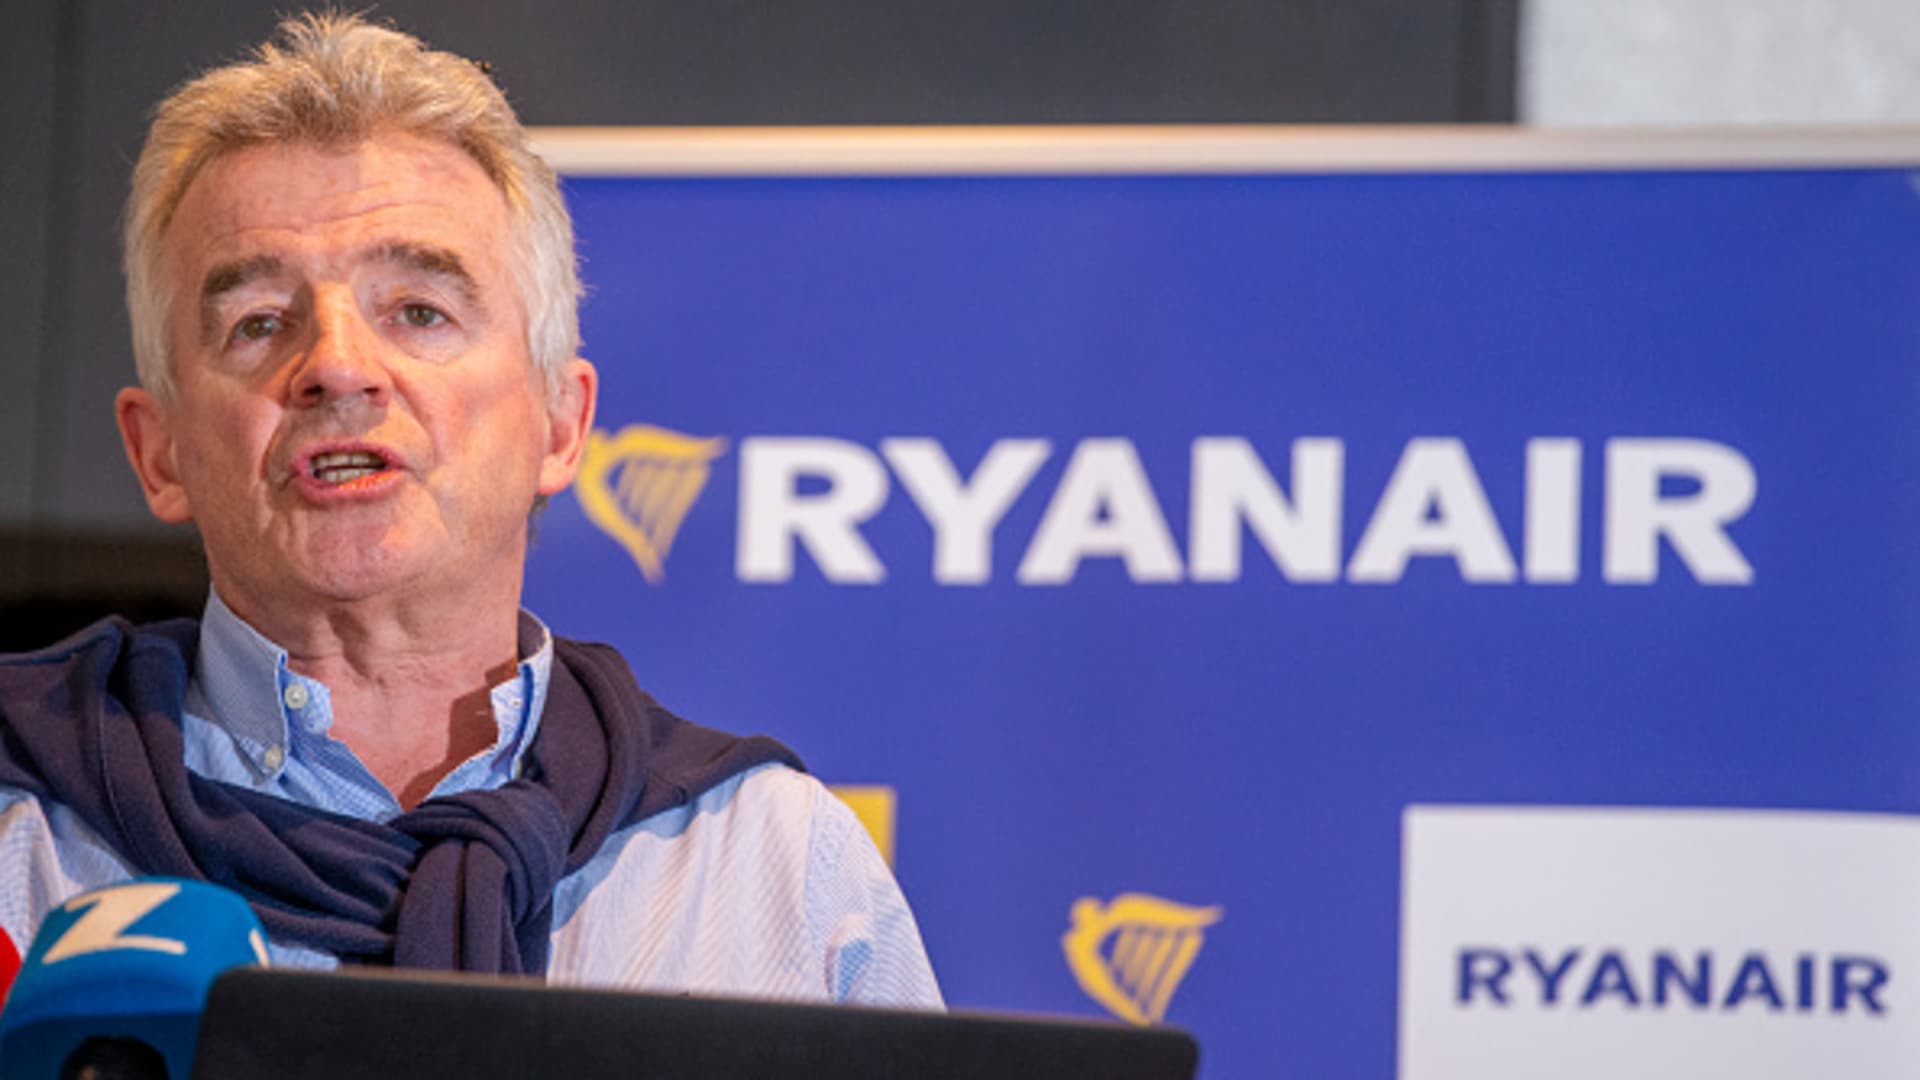 No more  flights: Budget airline Ryanair says ticket prices will have to rise